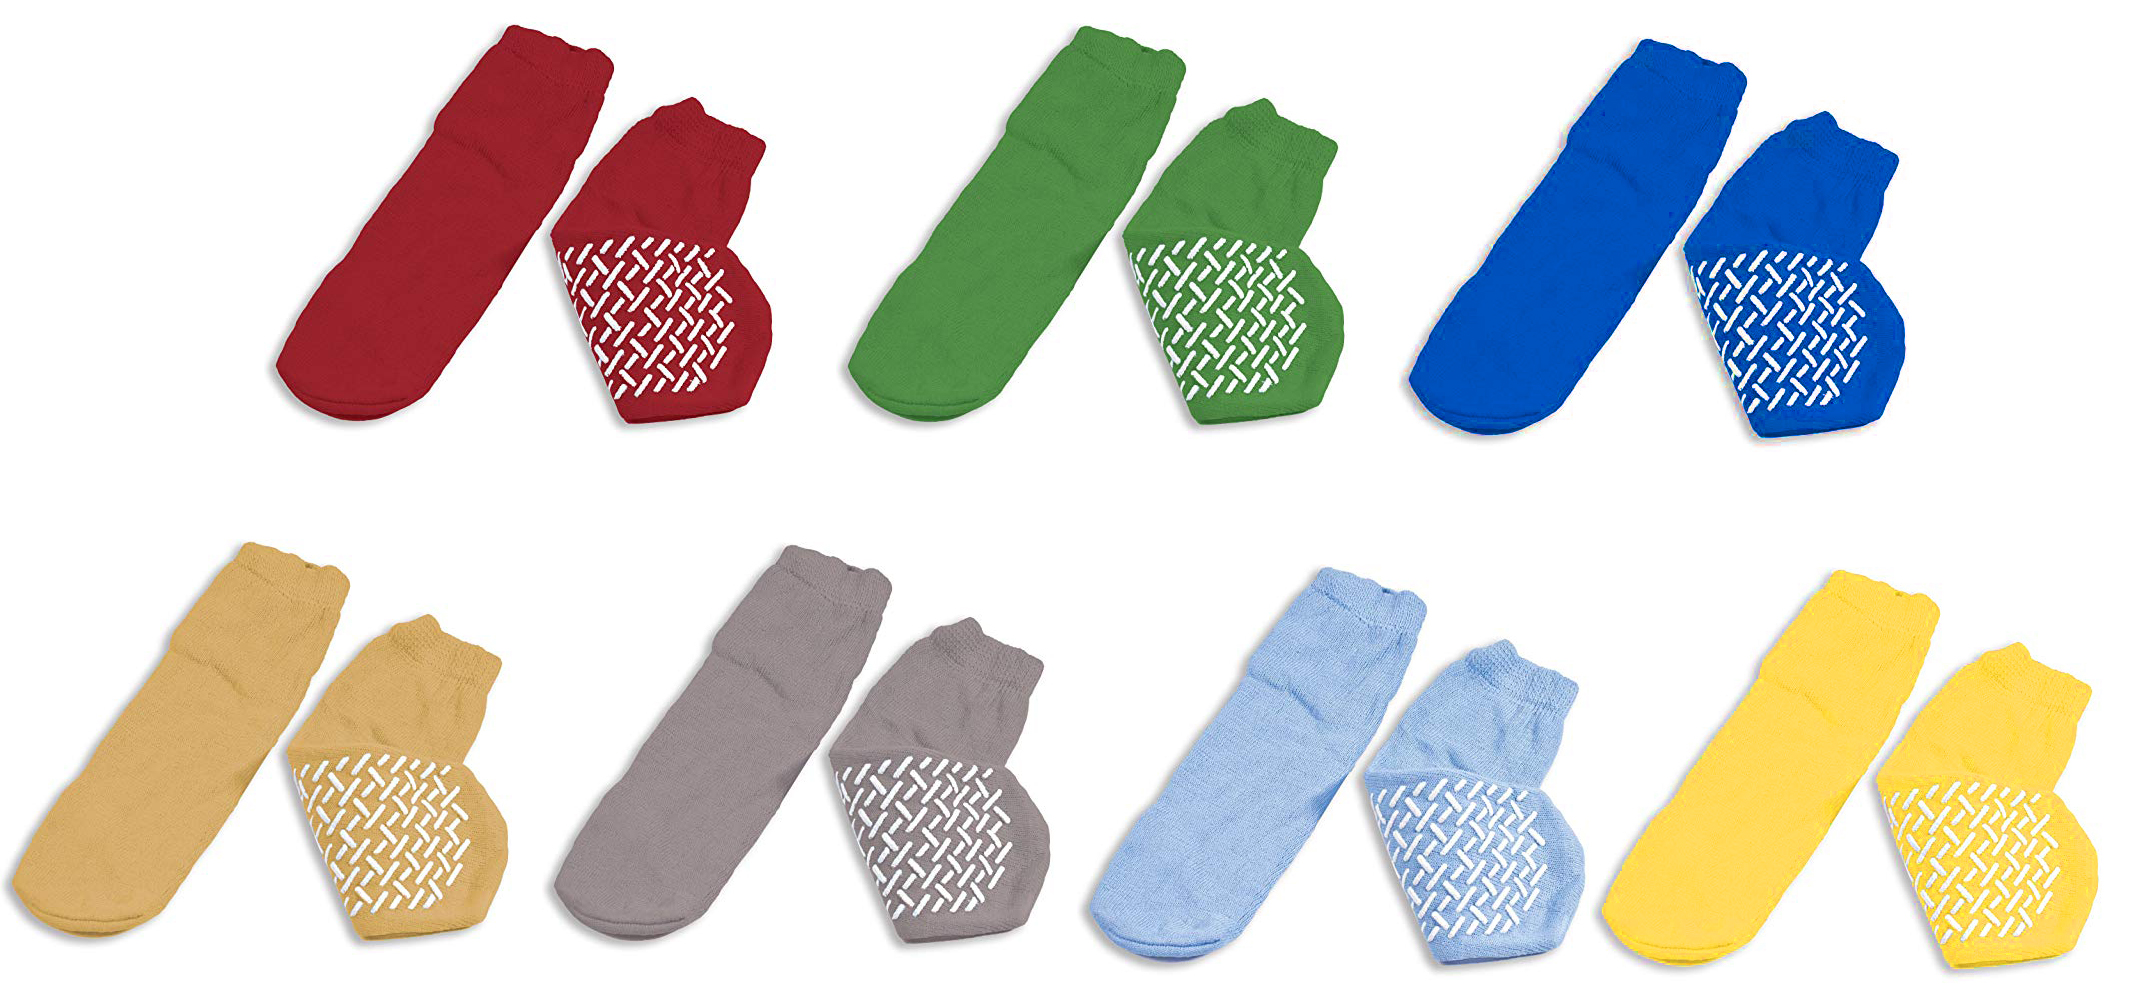 Personal Touch Top of the Line Mid-Calf Hospital Slipper Socks